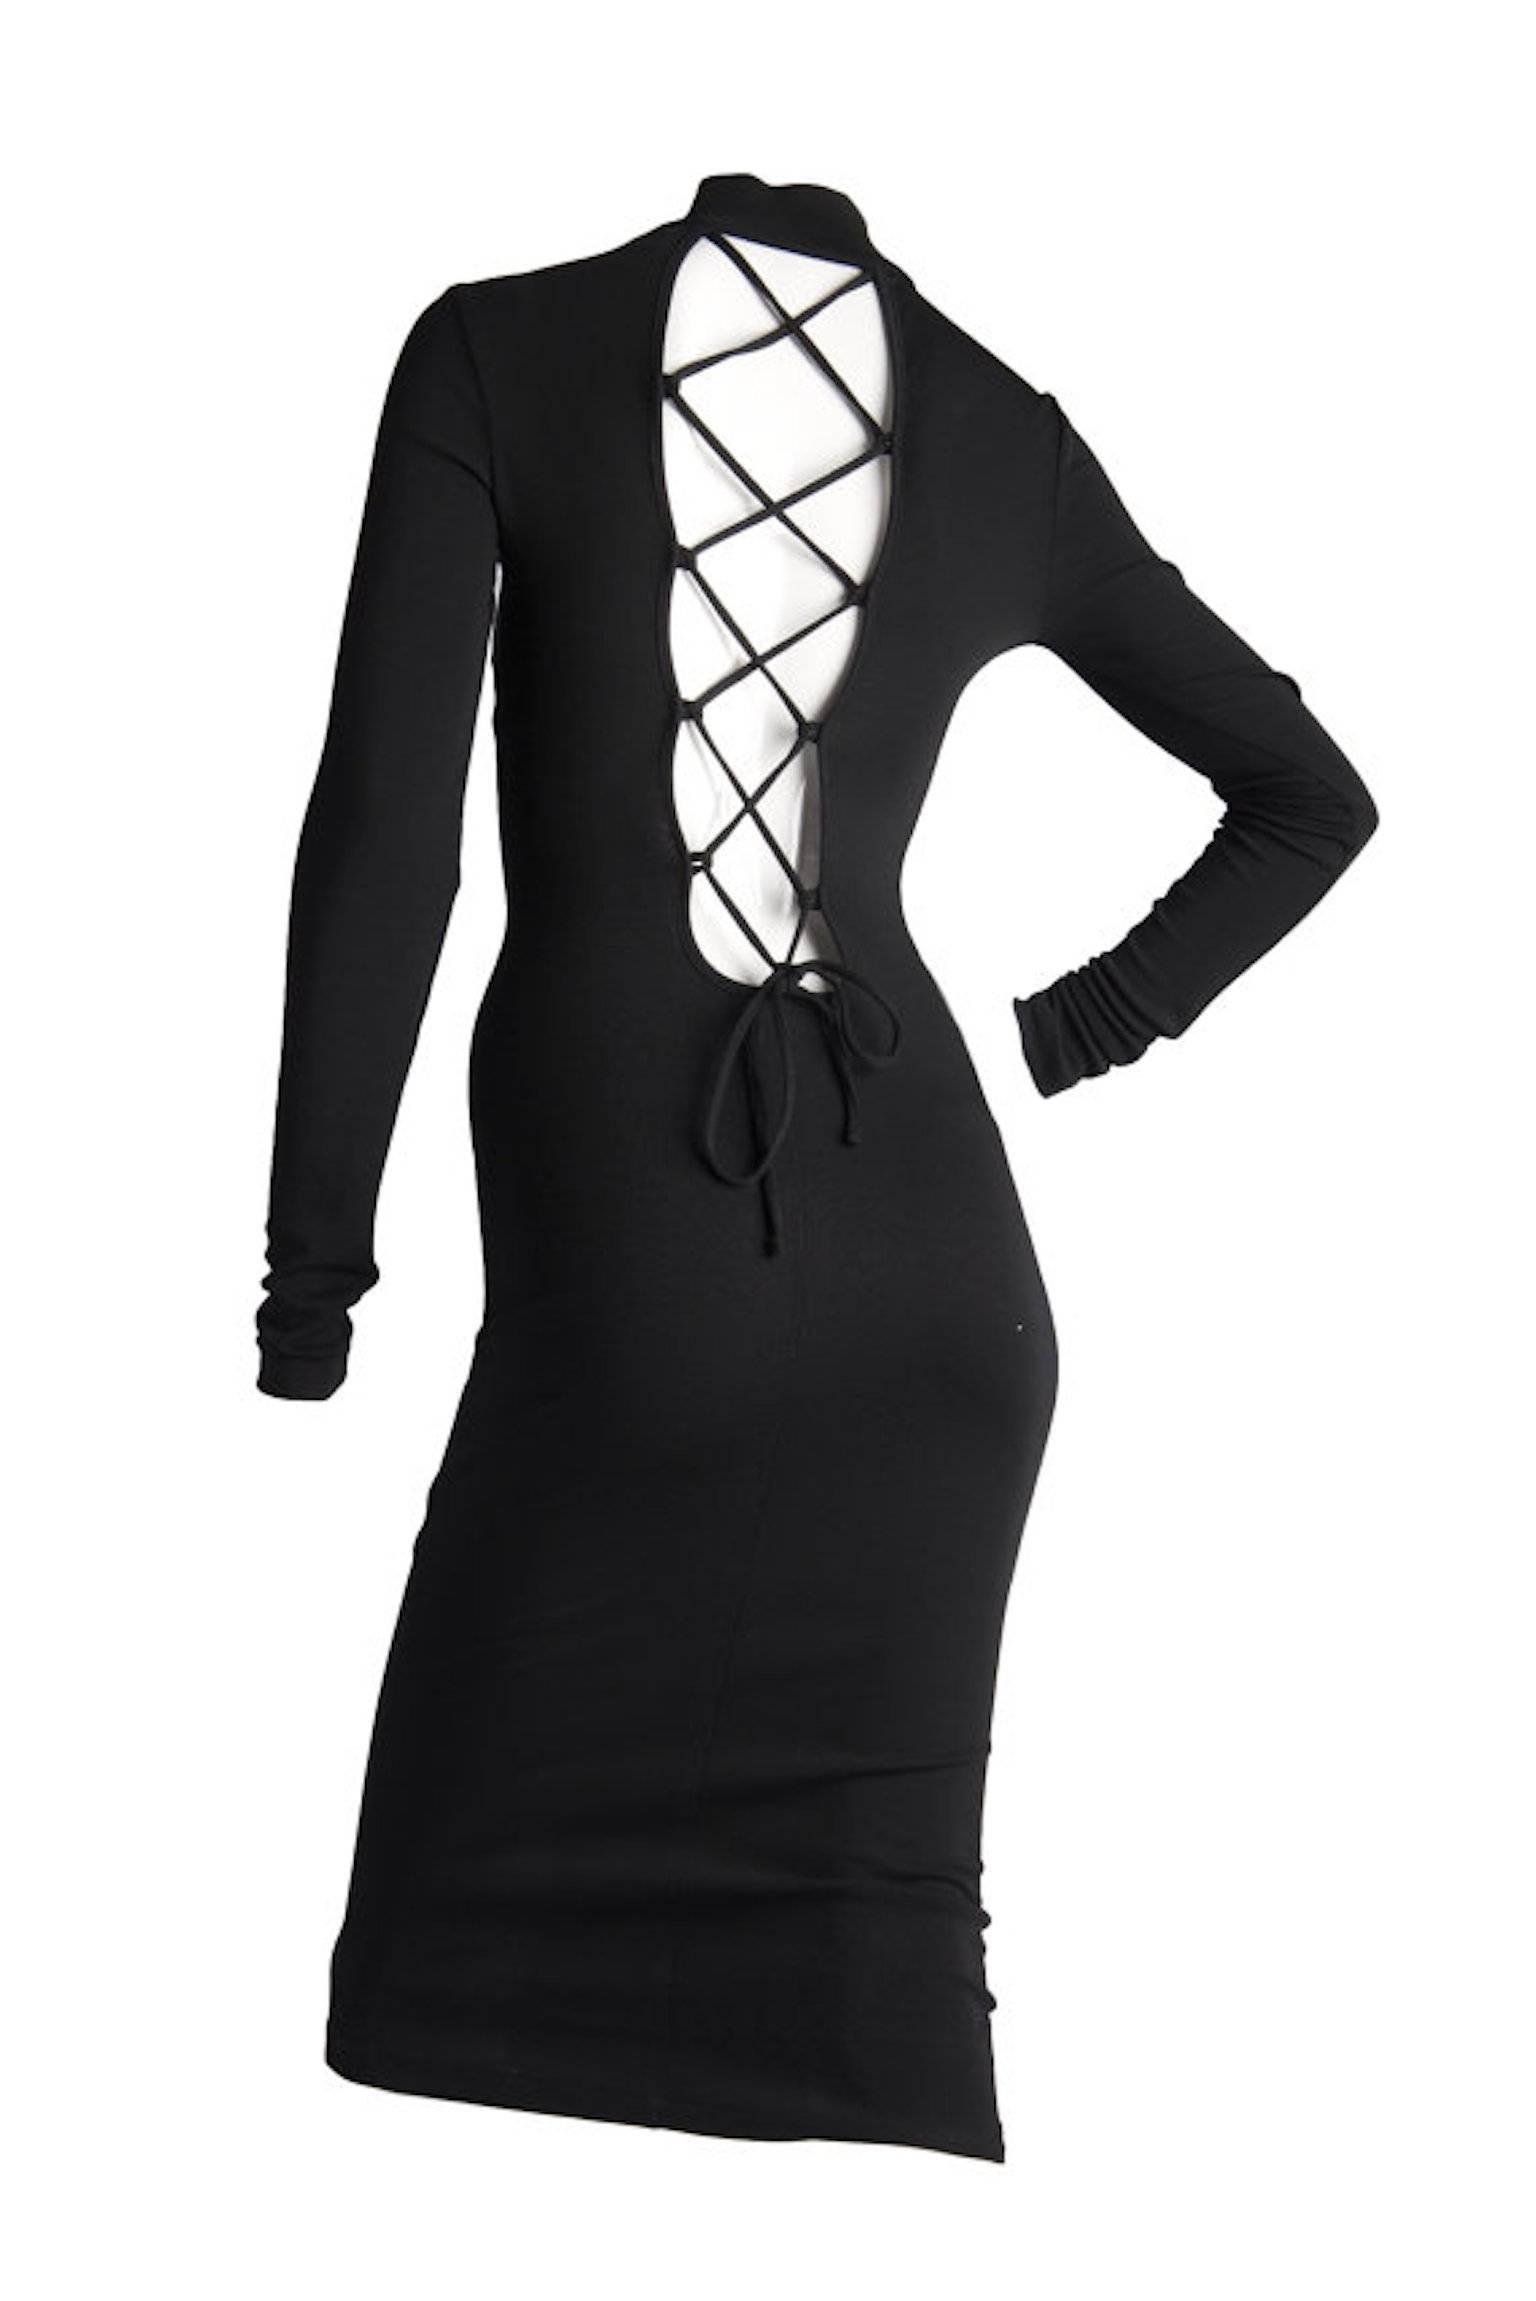 Dolce & Gabbana black stretch open back tie detail dress, also has zip on shoulder. Long sleeve sand midi length. From the late 1990s

Size 40 on the label. UK 8/10. 16 inches across bust and 44 inches length.